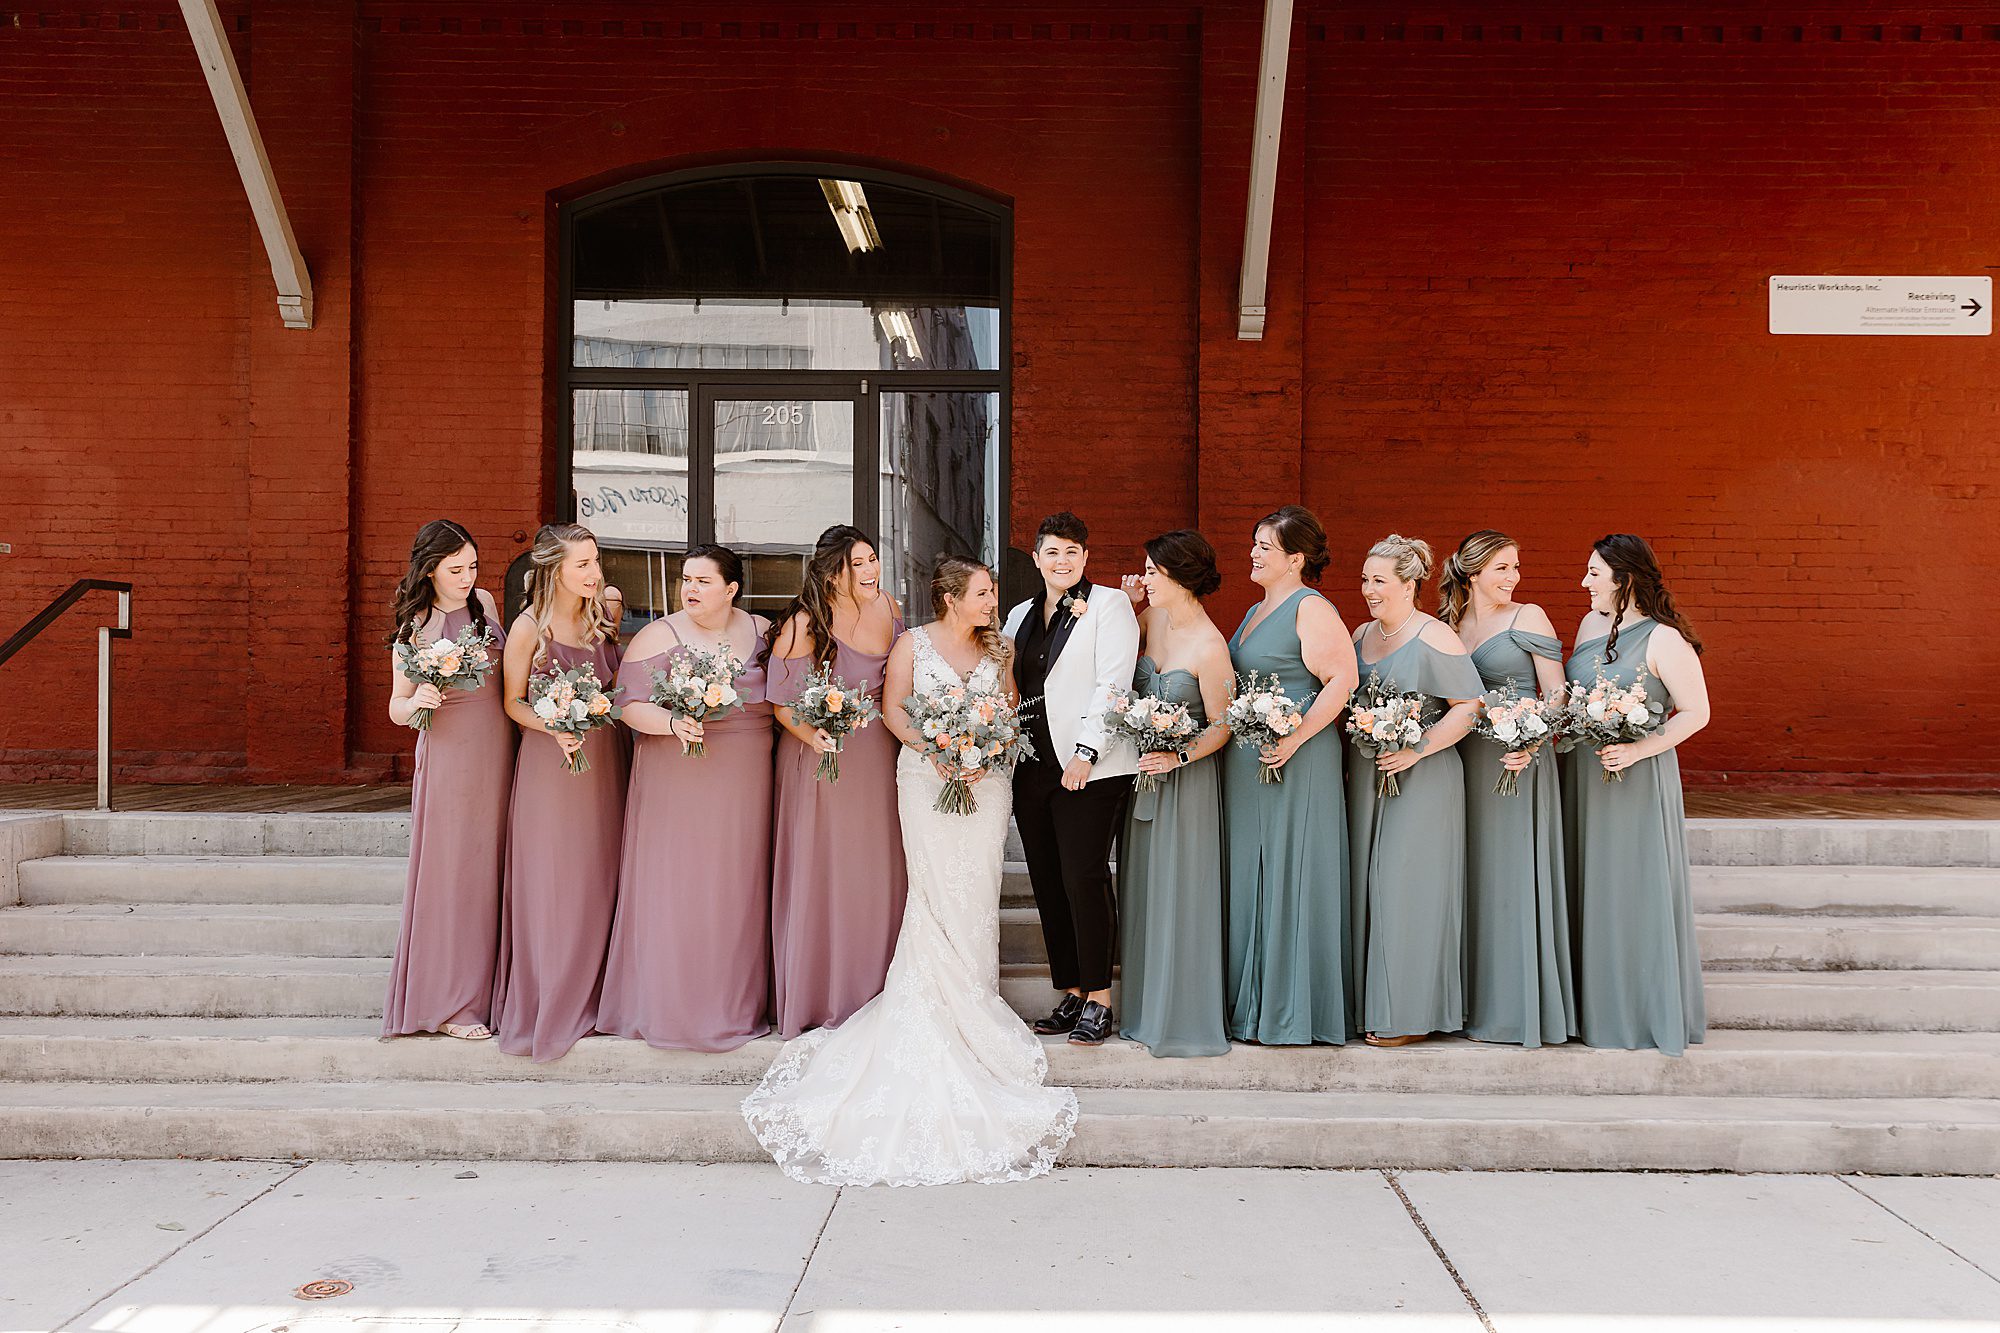 bride and bride stand with wedding party on stairs in front of red wall